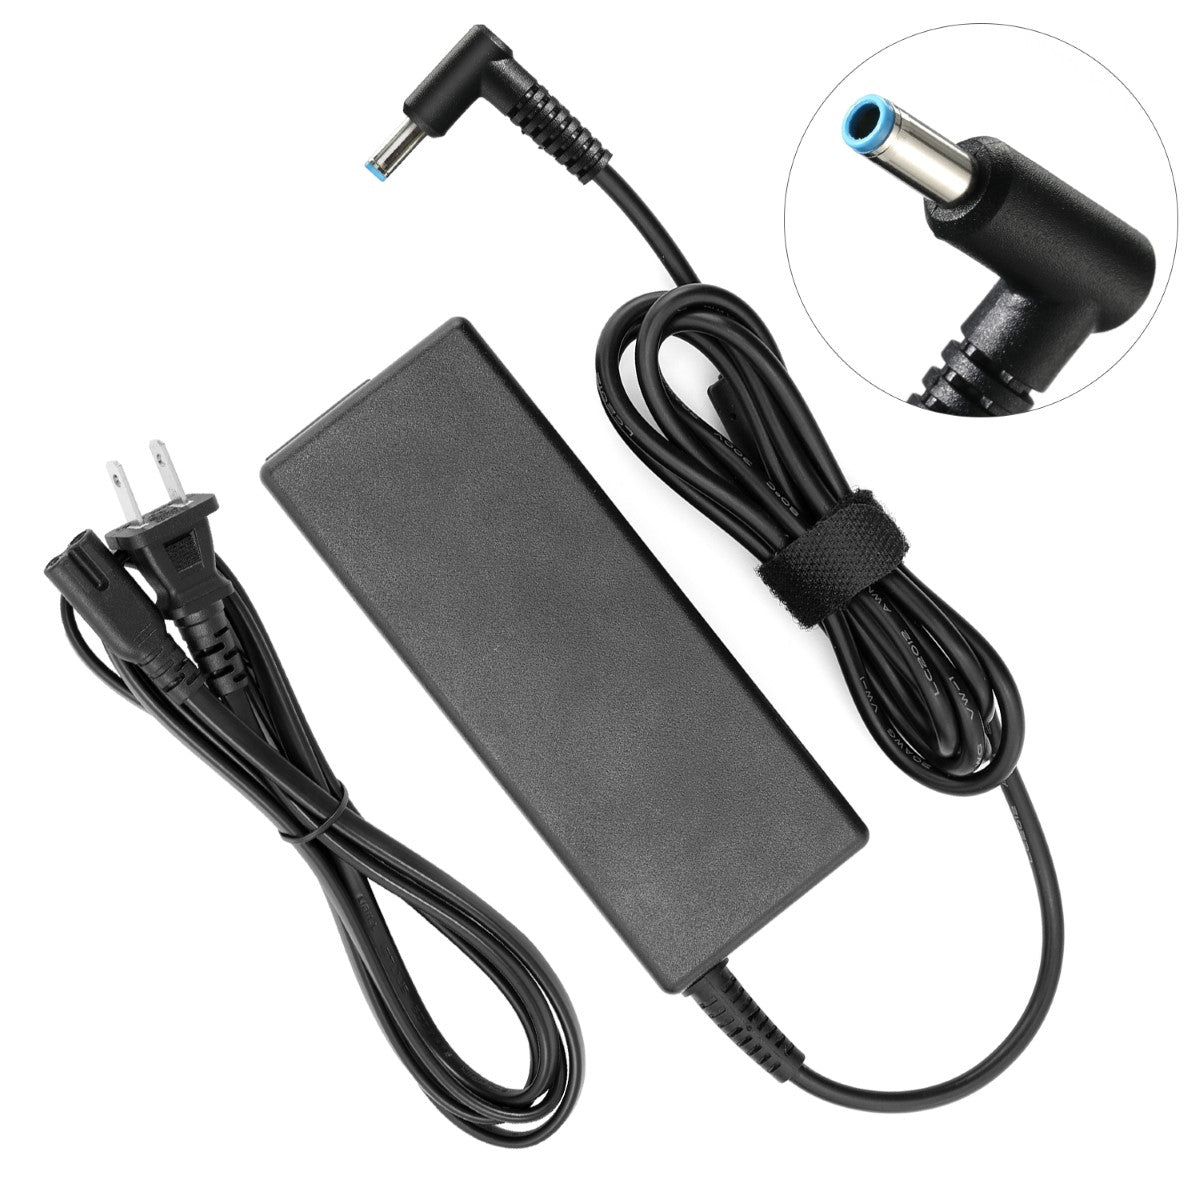 AC Adapter Charger for HP Envy TouchSmart 15-j030us Notebook.